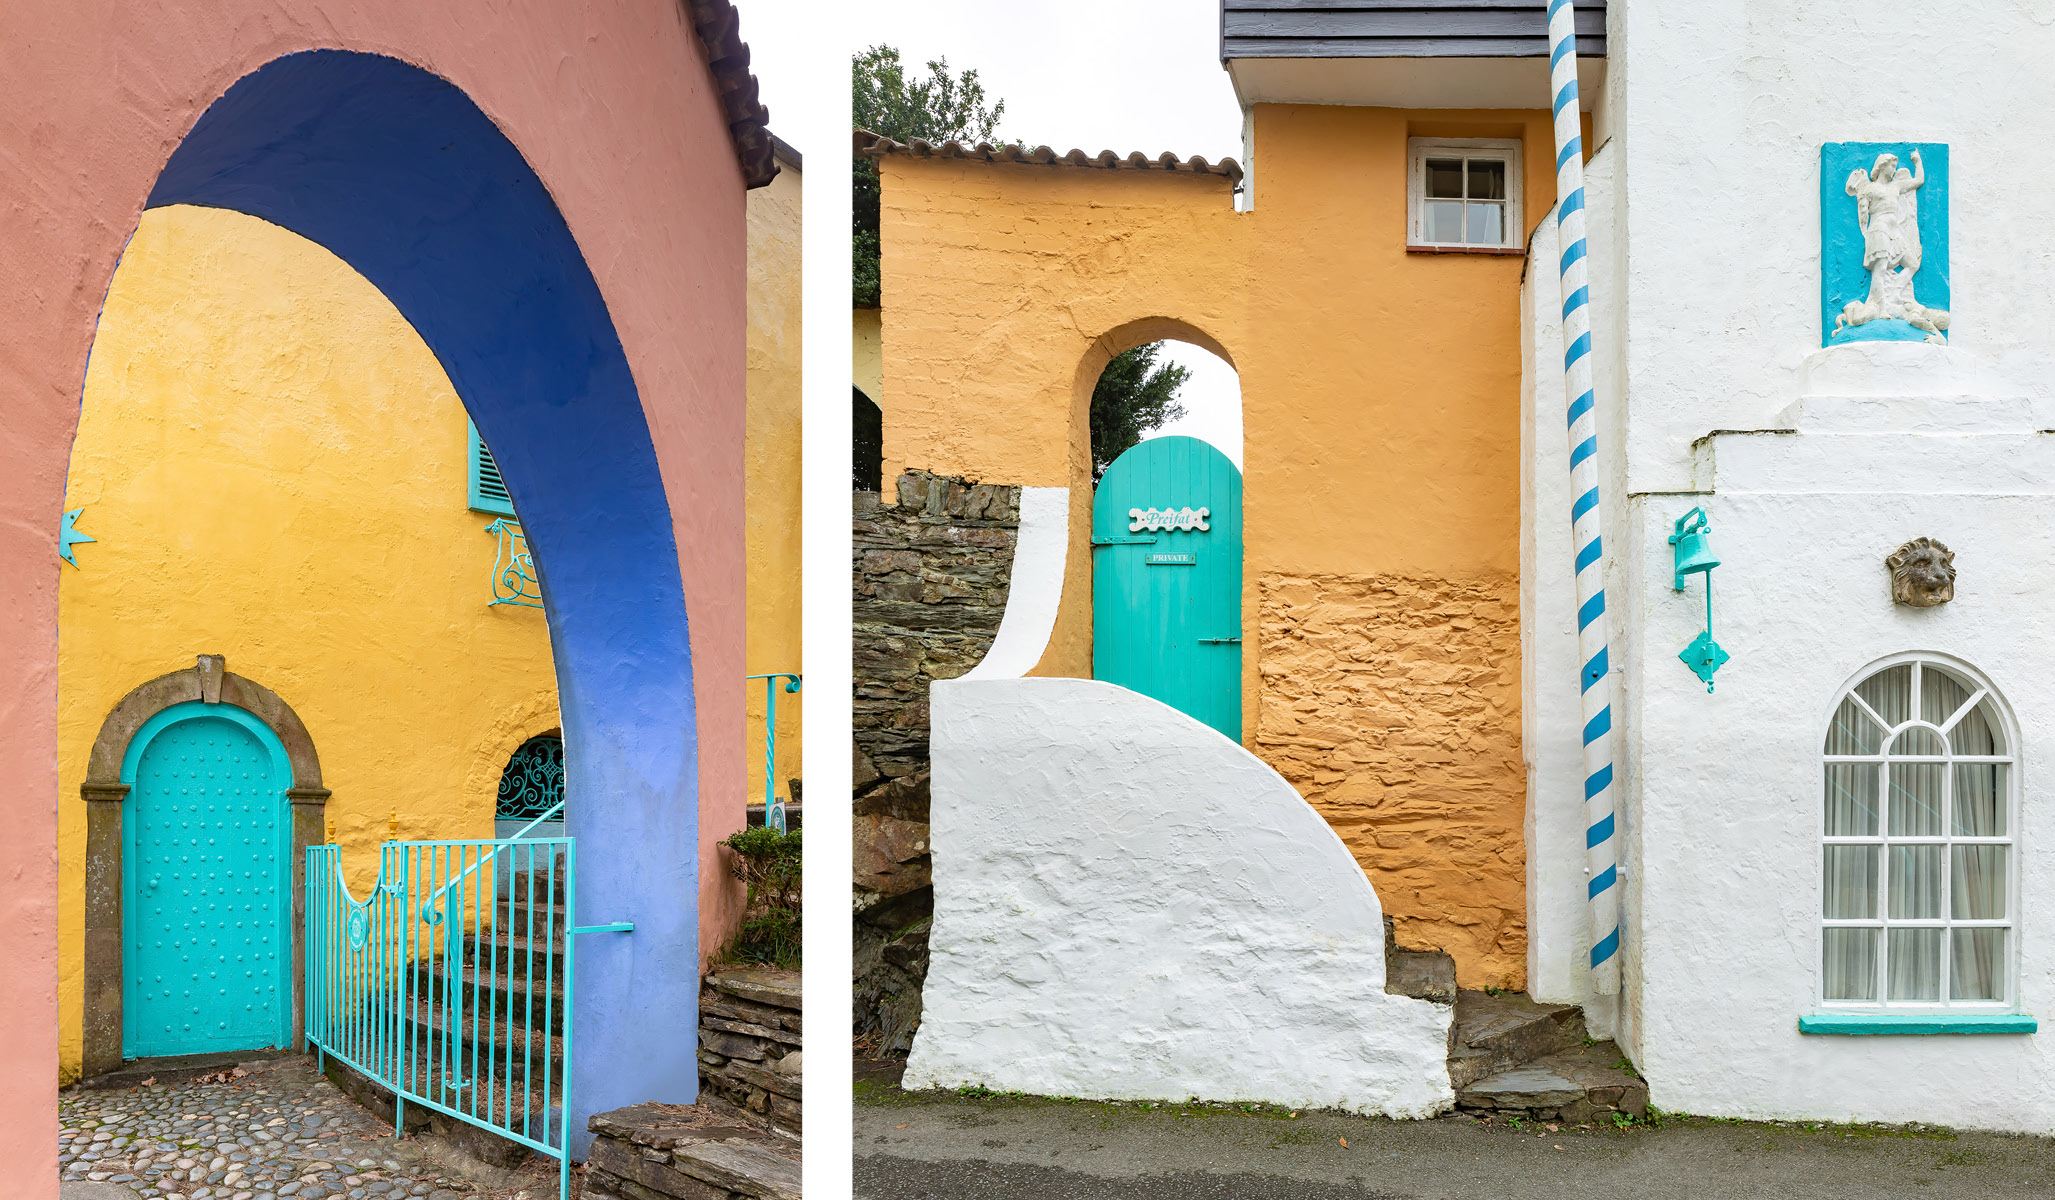 Photos of the colourful Battery buildings